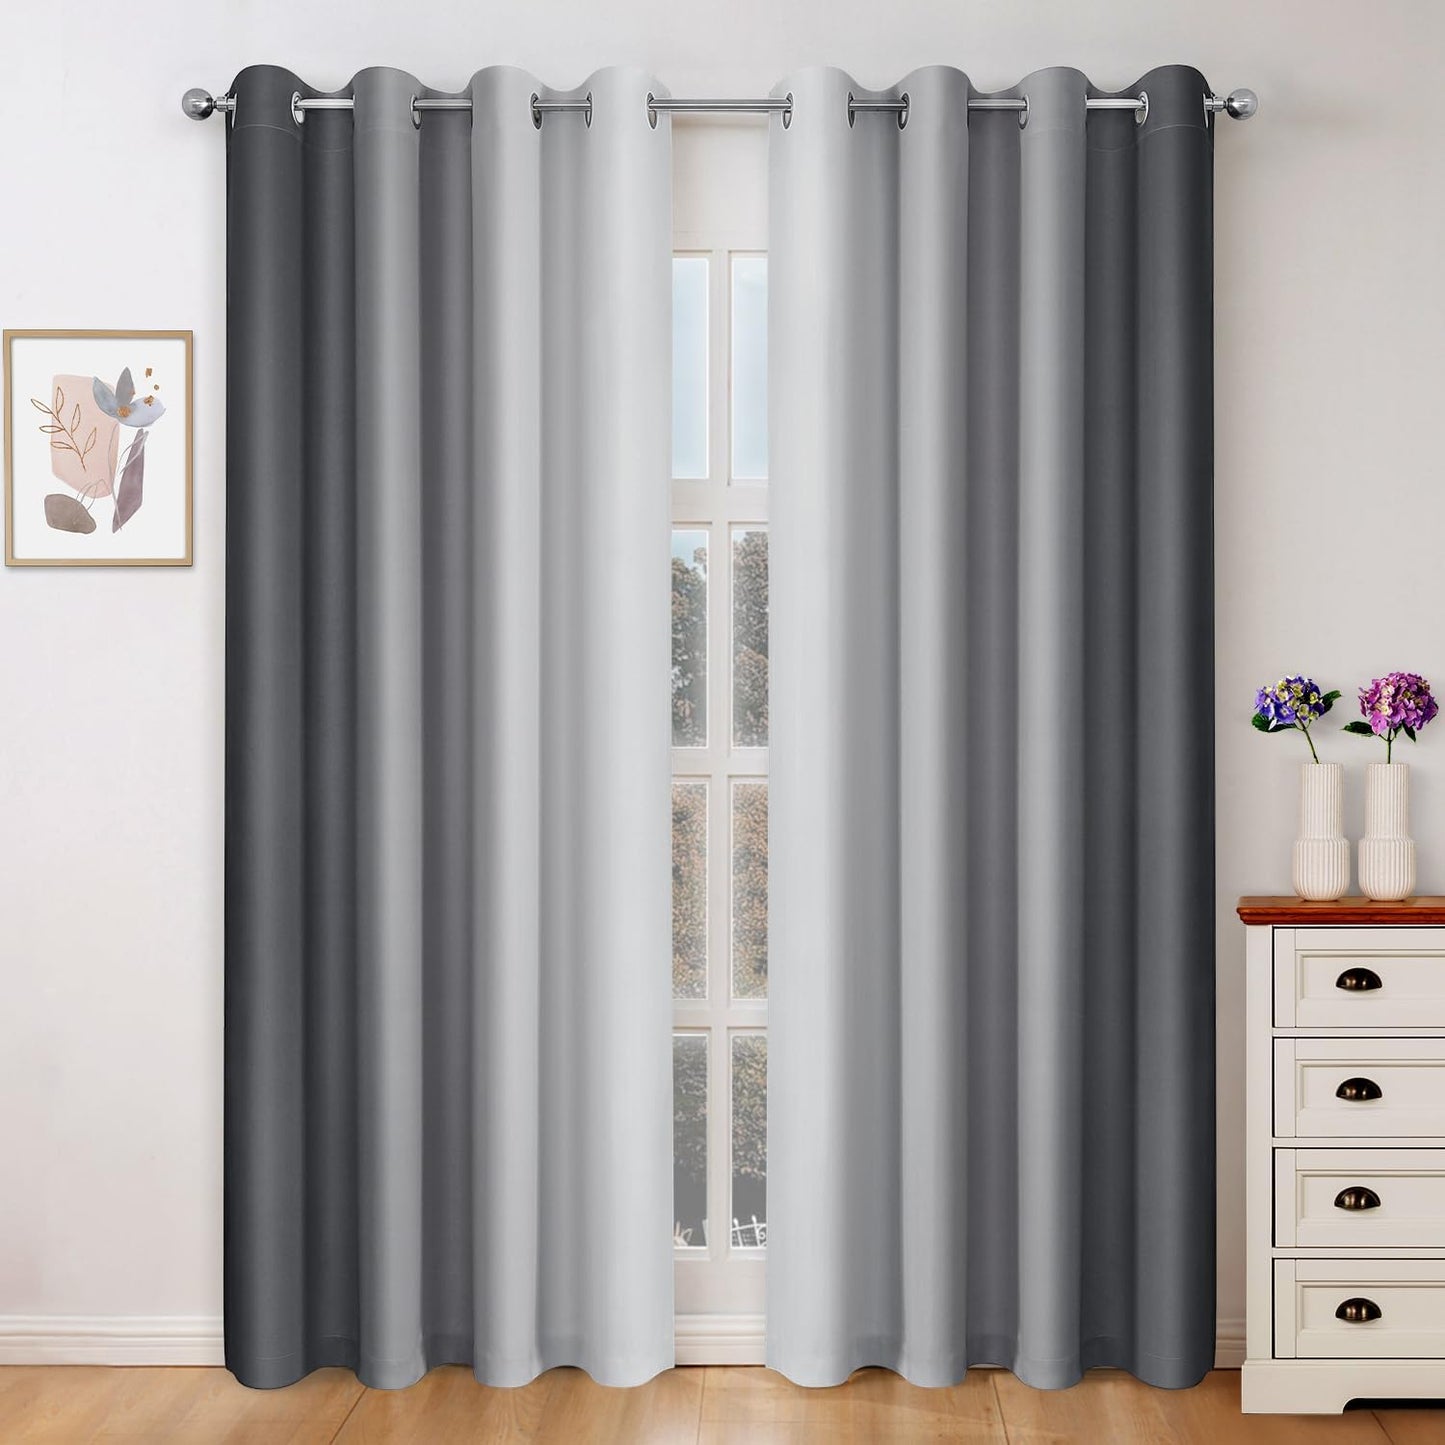 HOMEIDEAS Navy Blue Ombre Blackout Curtains 52 X 84 Inch Length Gradient Room Darkening Thermal Insulated Energy Saving Grommet 2 Panels Window Drapes for Living Room/Bedroom  HOMEIDEAS Grey 1 52"W X 96"L 